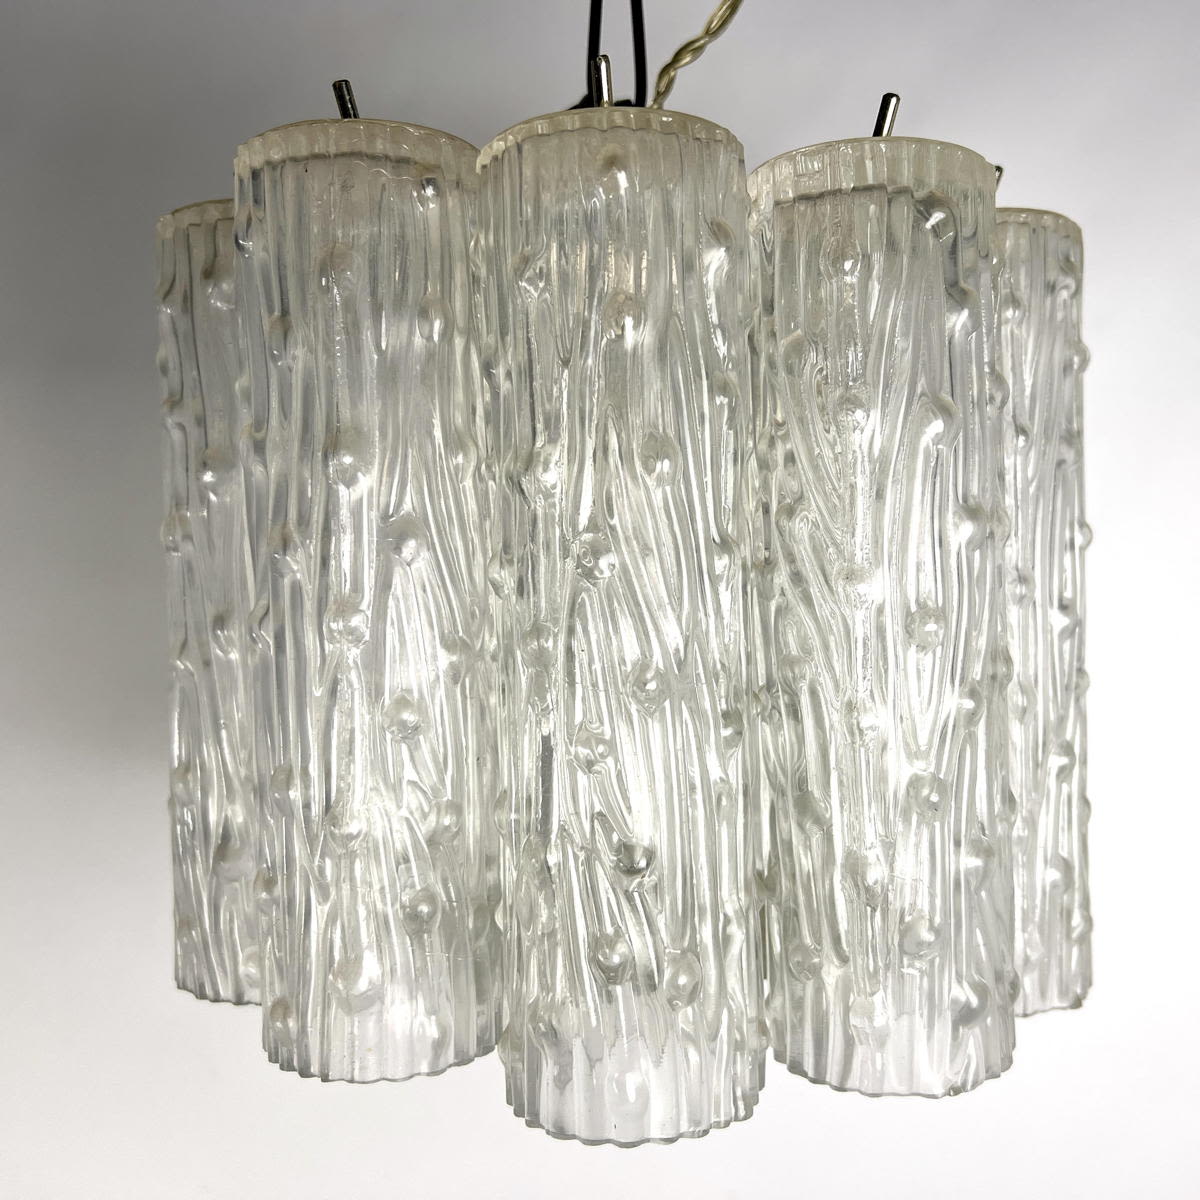 Small 10 Tube Chandelier Ceiling 3acb8e